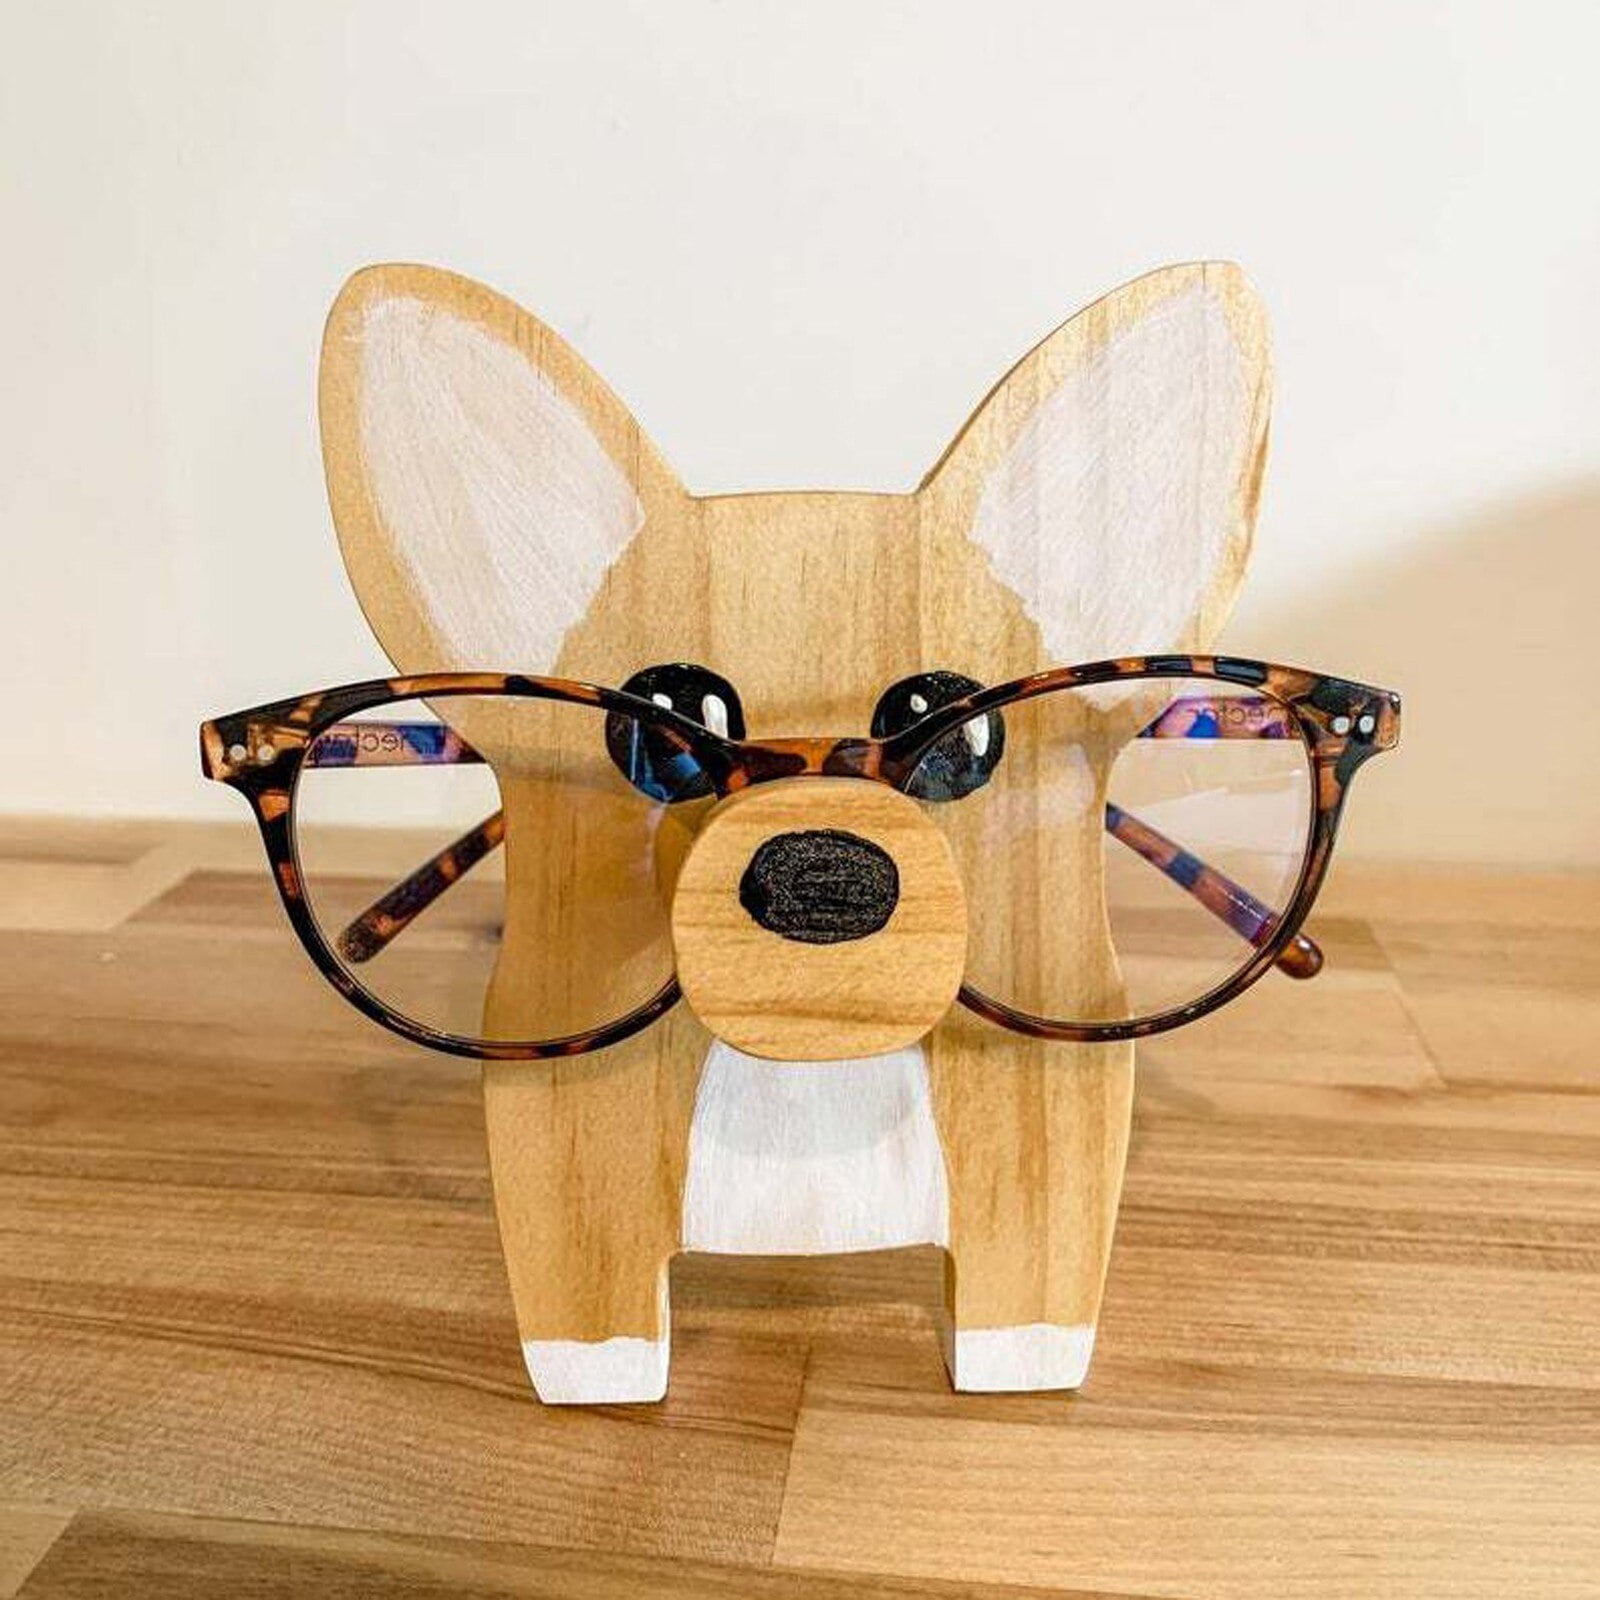 Wooden Eyeglass Holder Animal Sunglasses Holder Novelty Spectacle Holder  Glasses Stand Giraffe Flamingo Gifts Funny Hand Carved Desk Accessories For  W